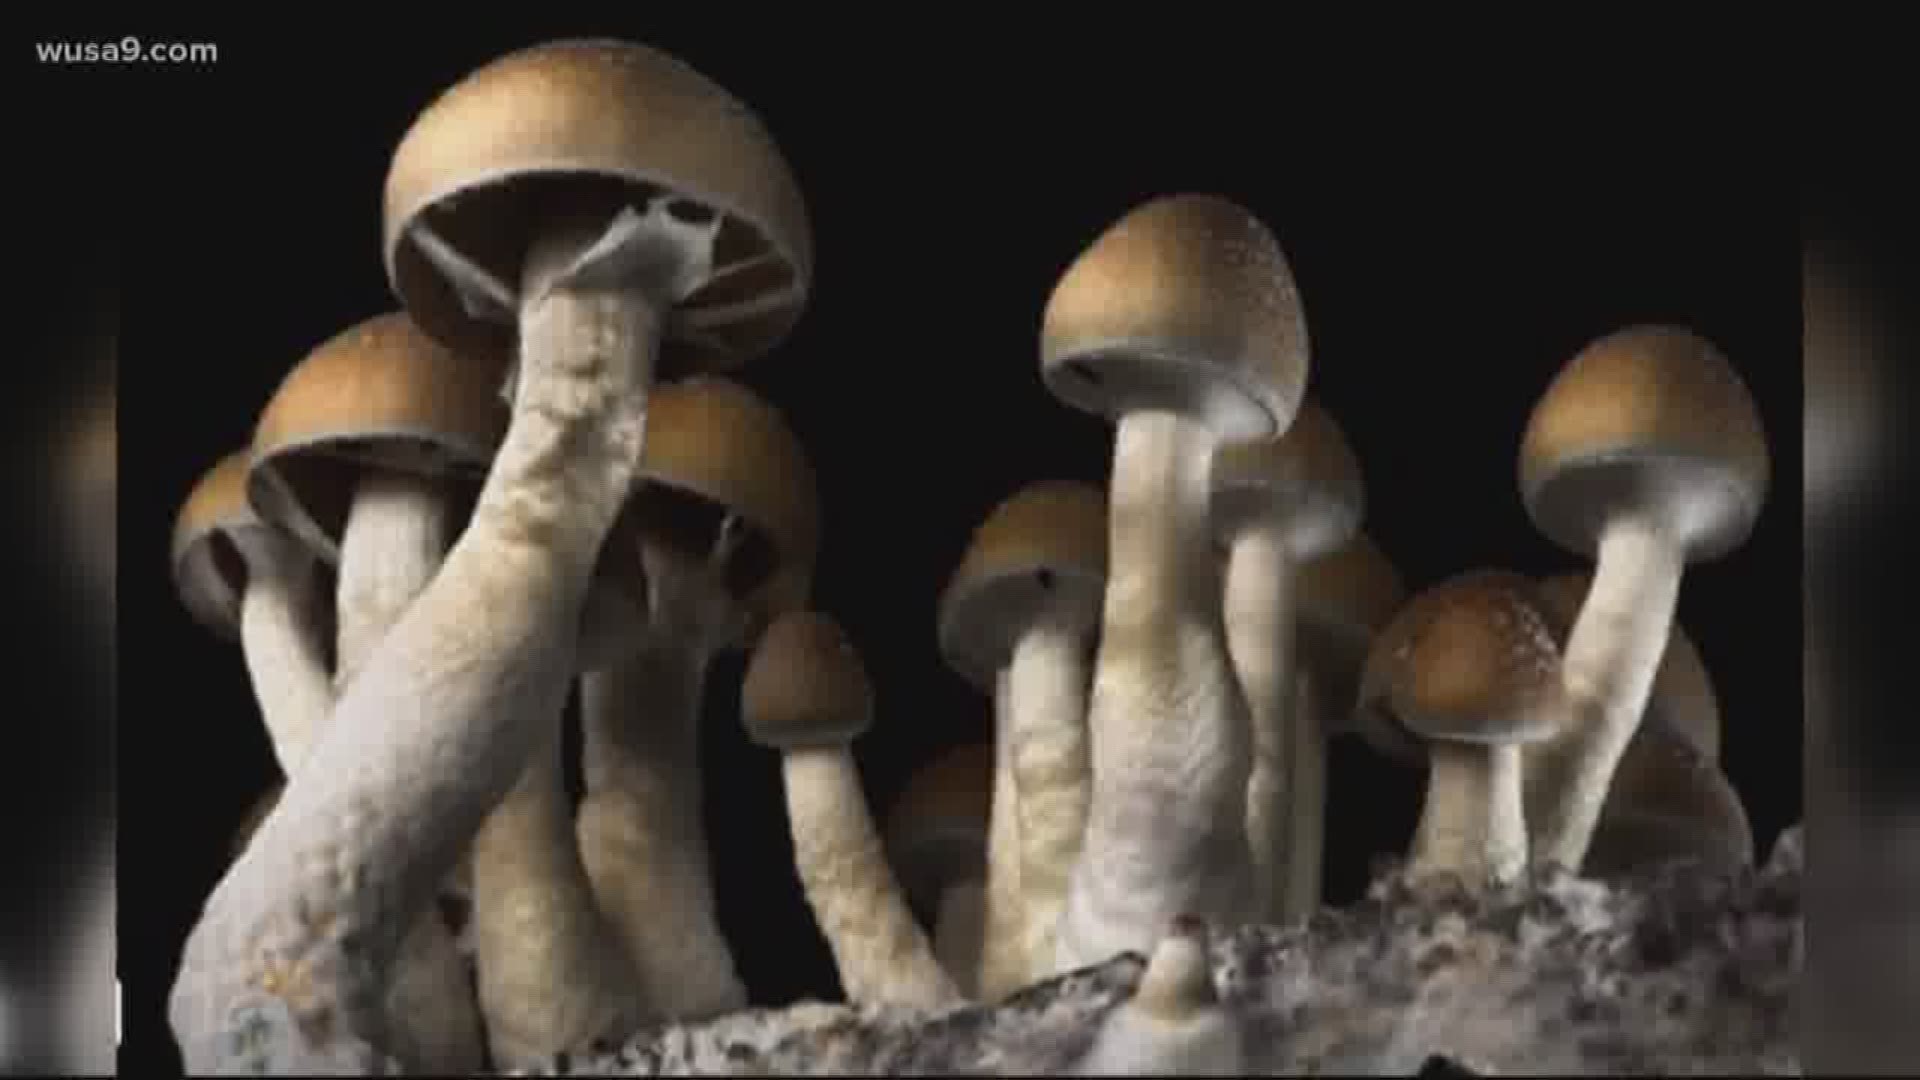 A group called "Decriminalize Nature D.C." is pushing to reduce penalties on the use, possession and cultivation of mushrooms and psychedelic plants